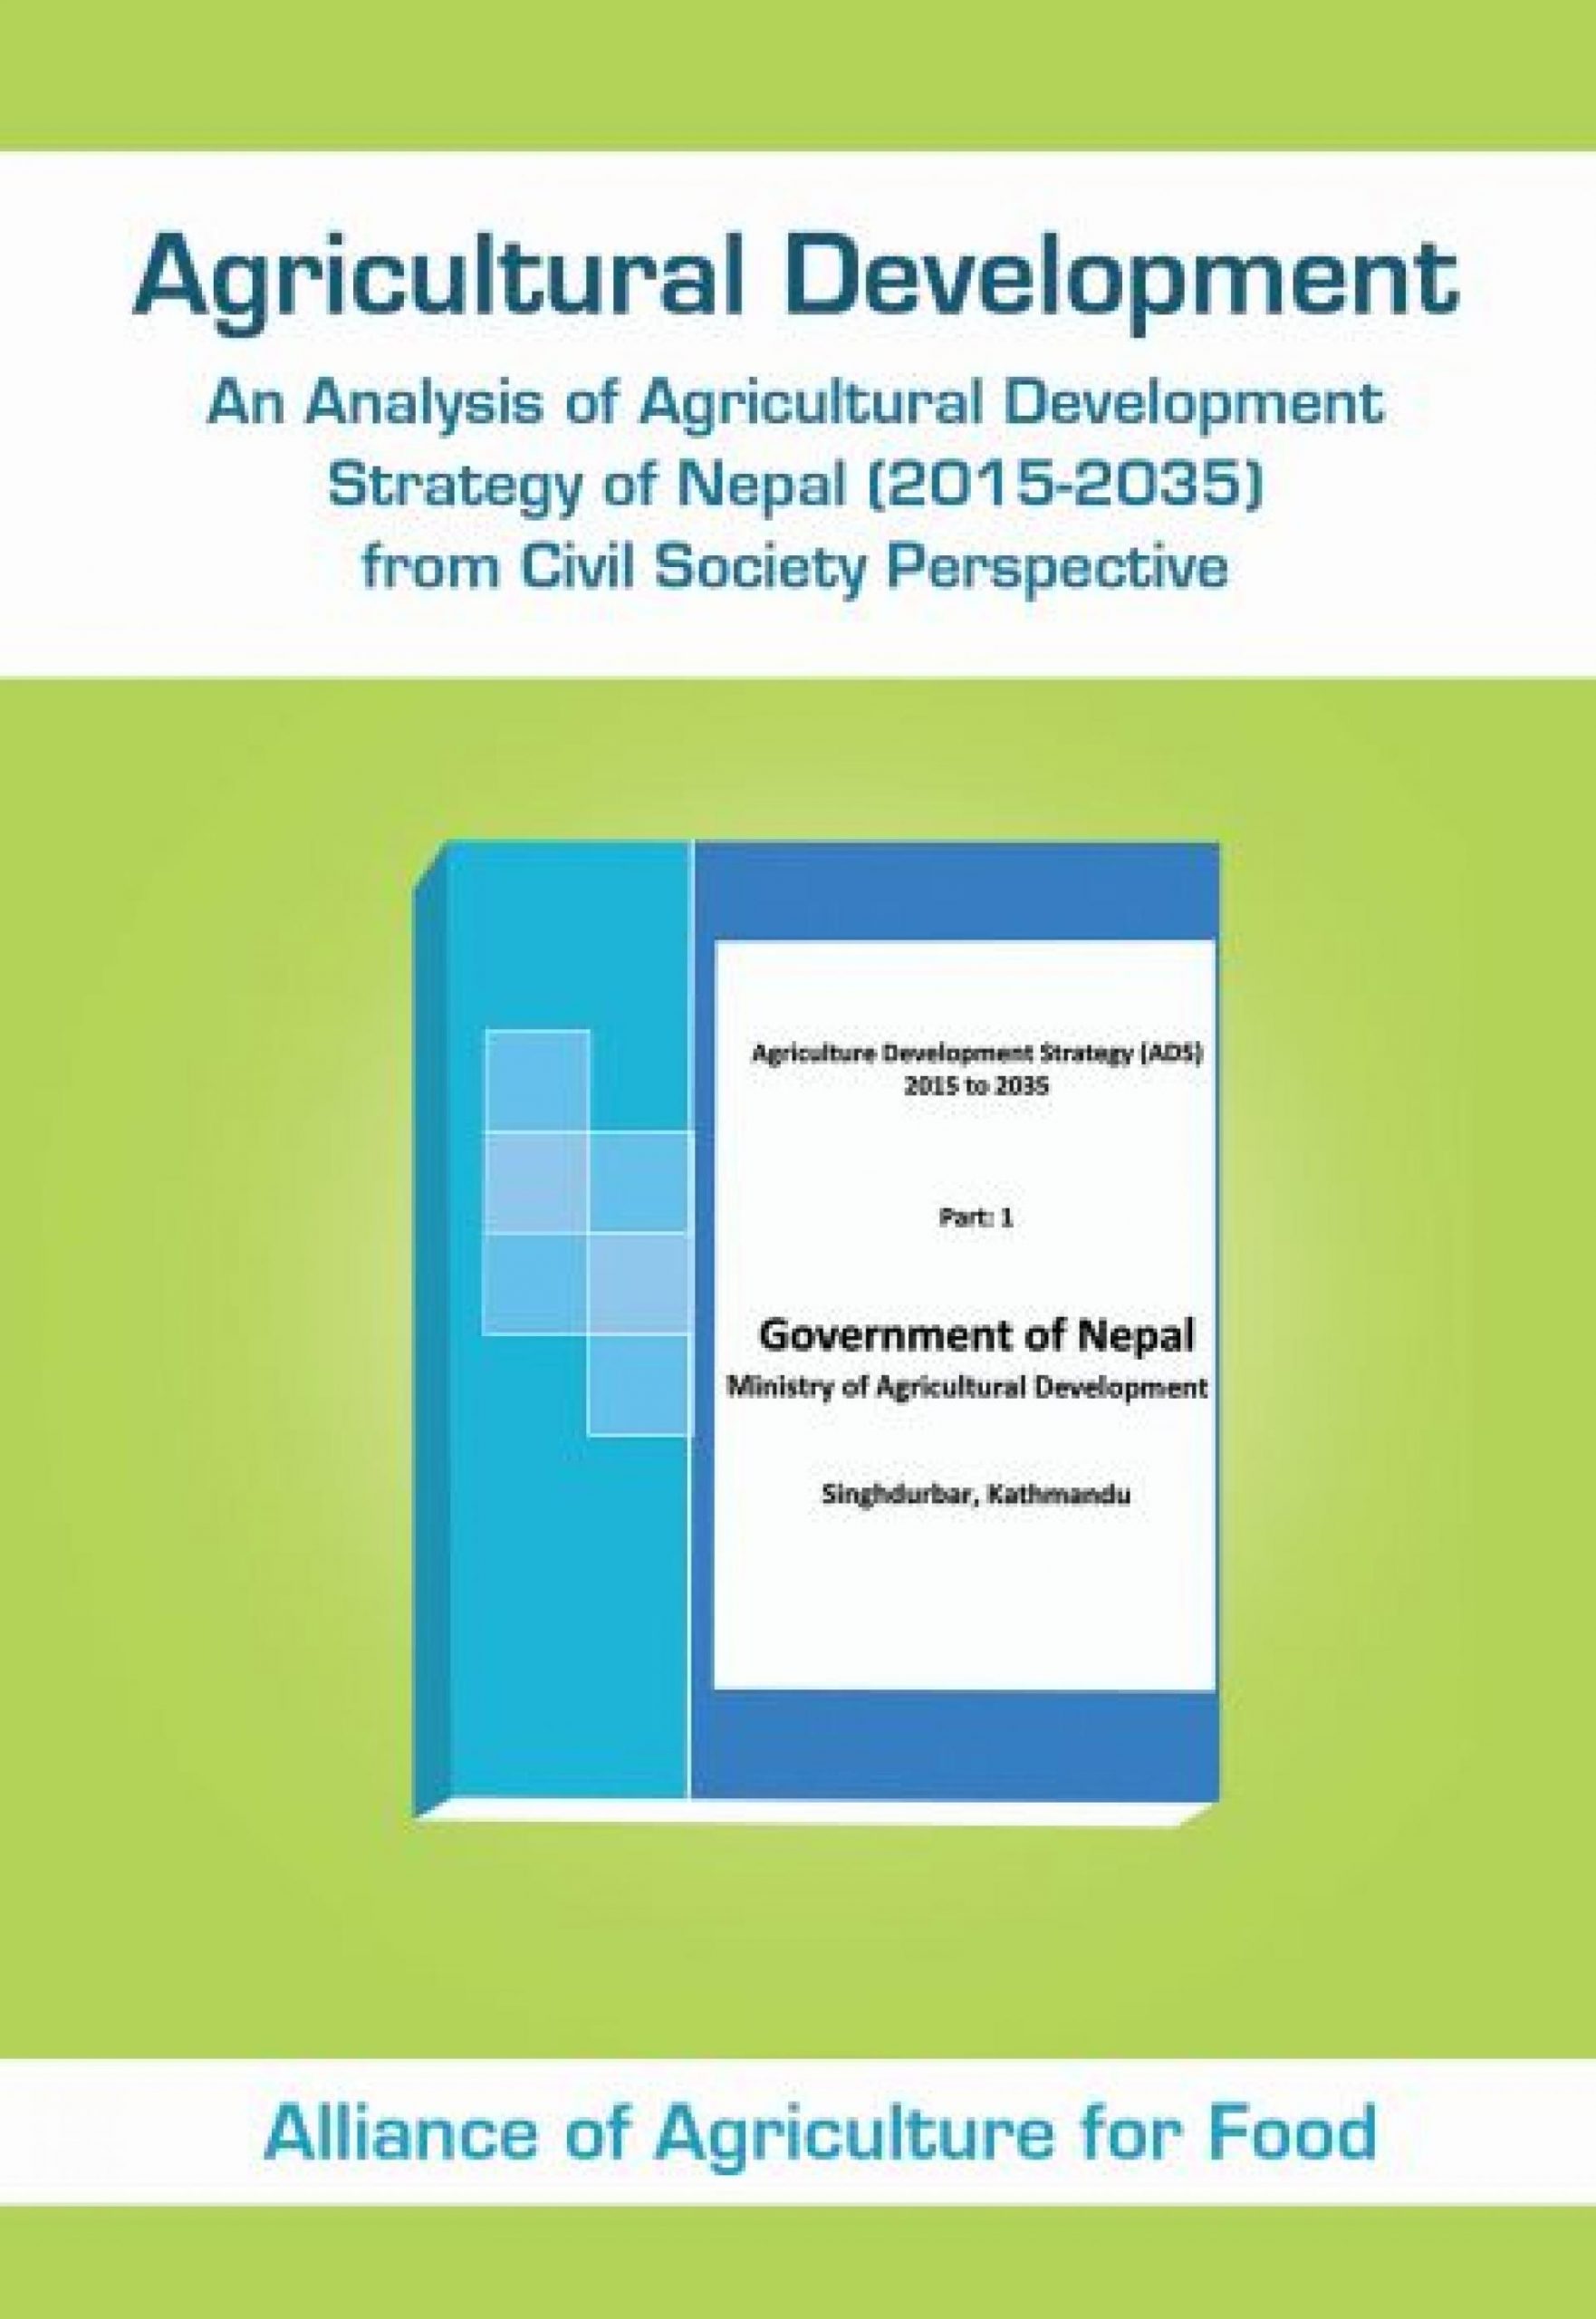 Nepal’s Agricultural Development: Civic Analysis of Agricultural Development Strategy of Nepal